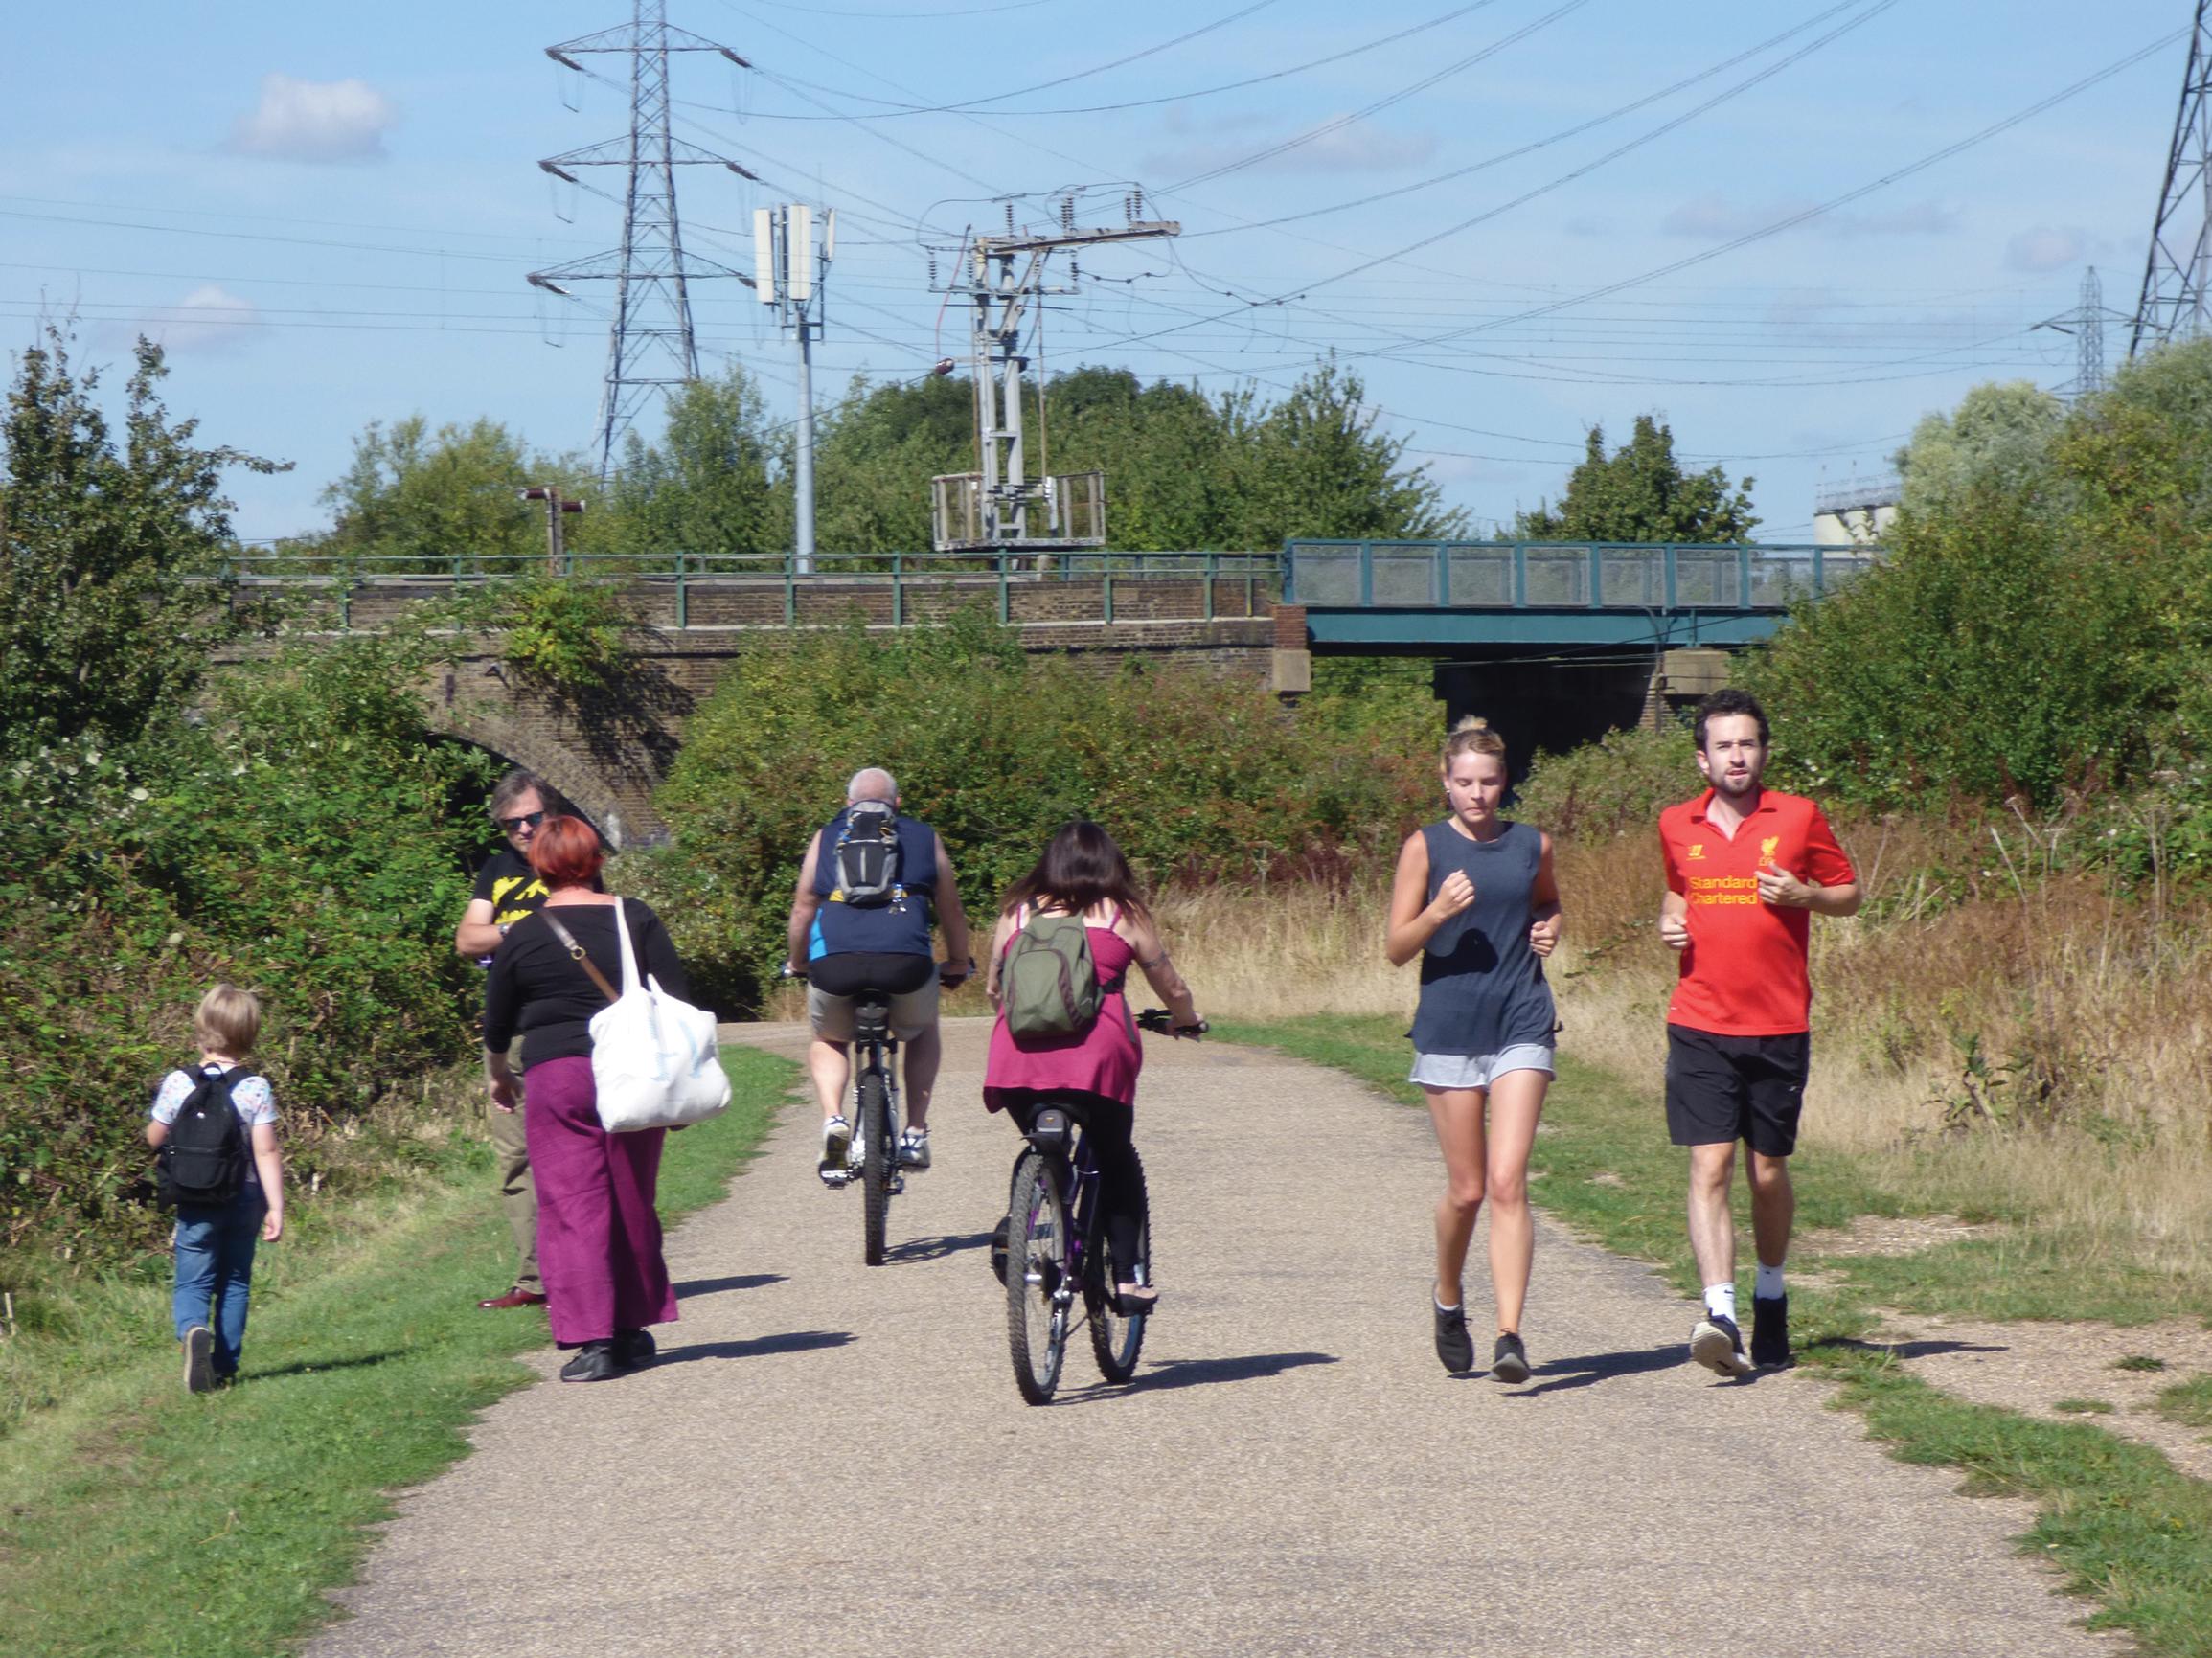 The National Cycle Network is a popular shared space, used by nearly five million cyclists, walkers and runners each year, says Sustrans